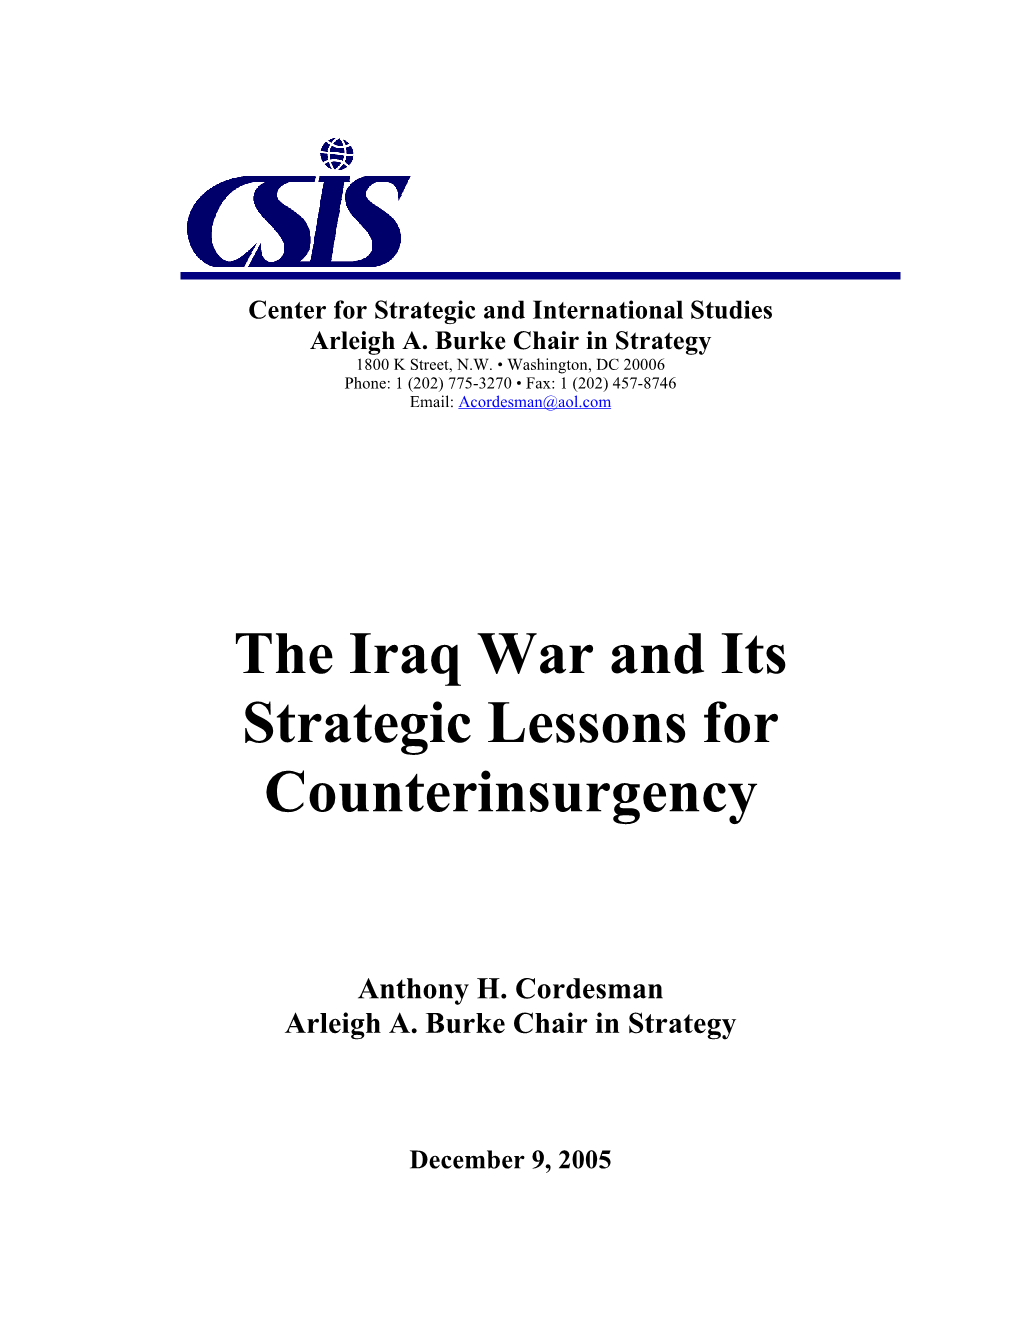 The Iraq War and Its Strategic Lessons for Counterinsurgency